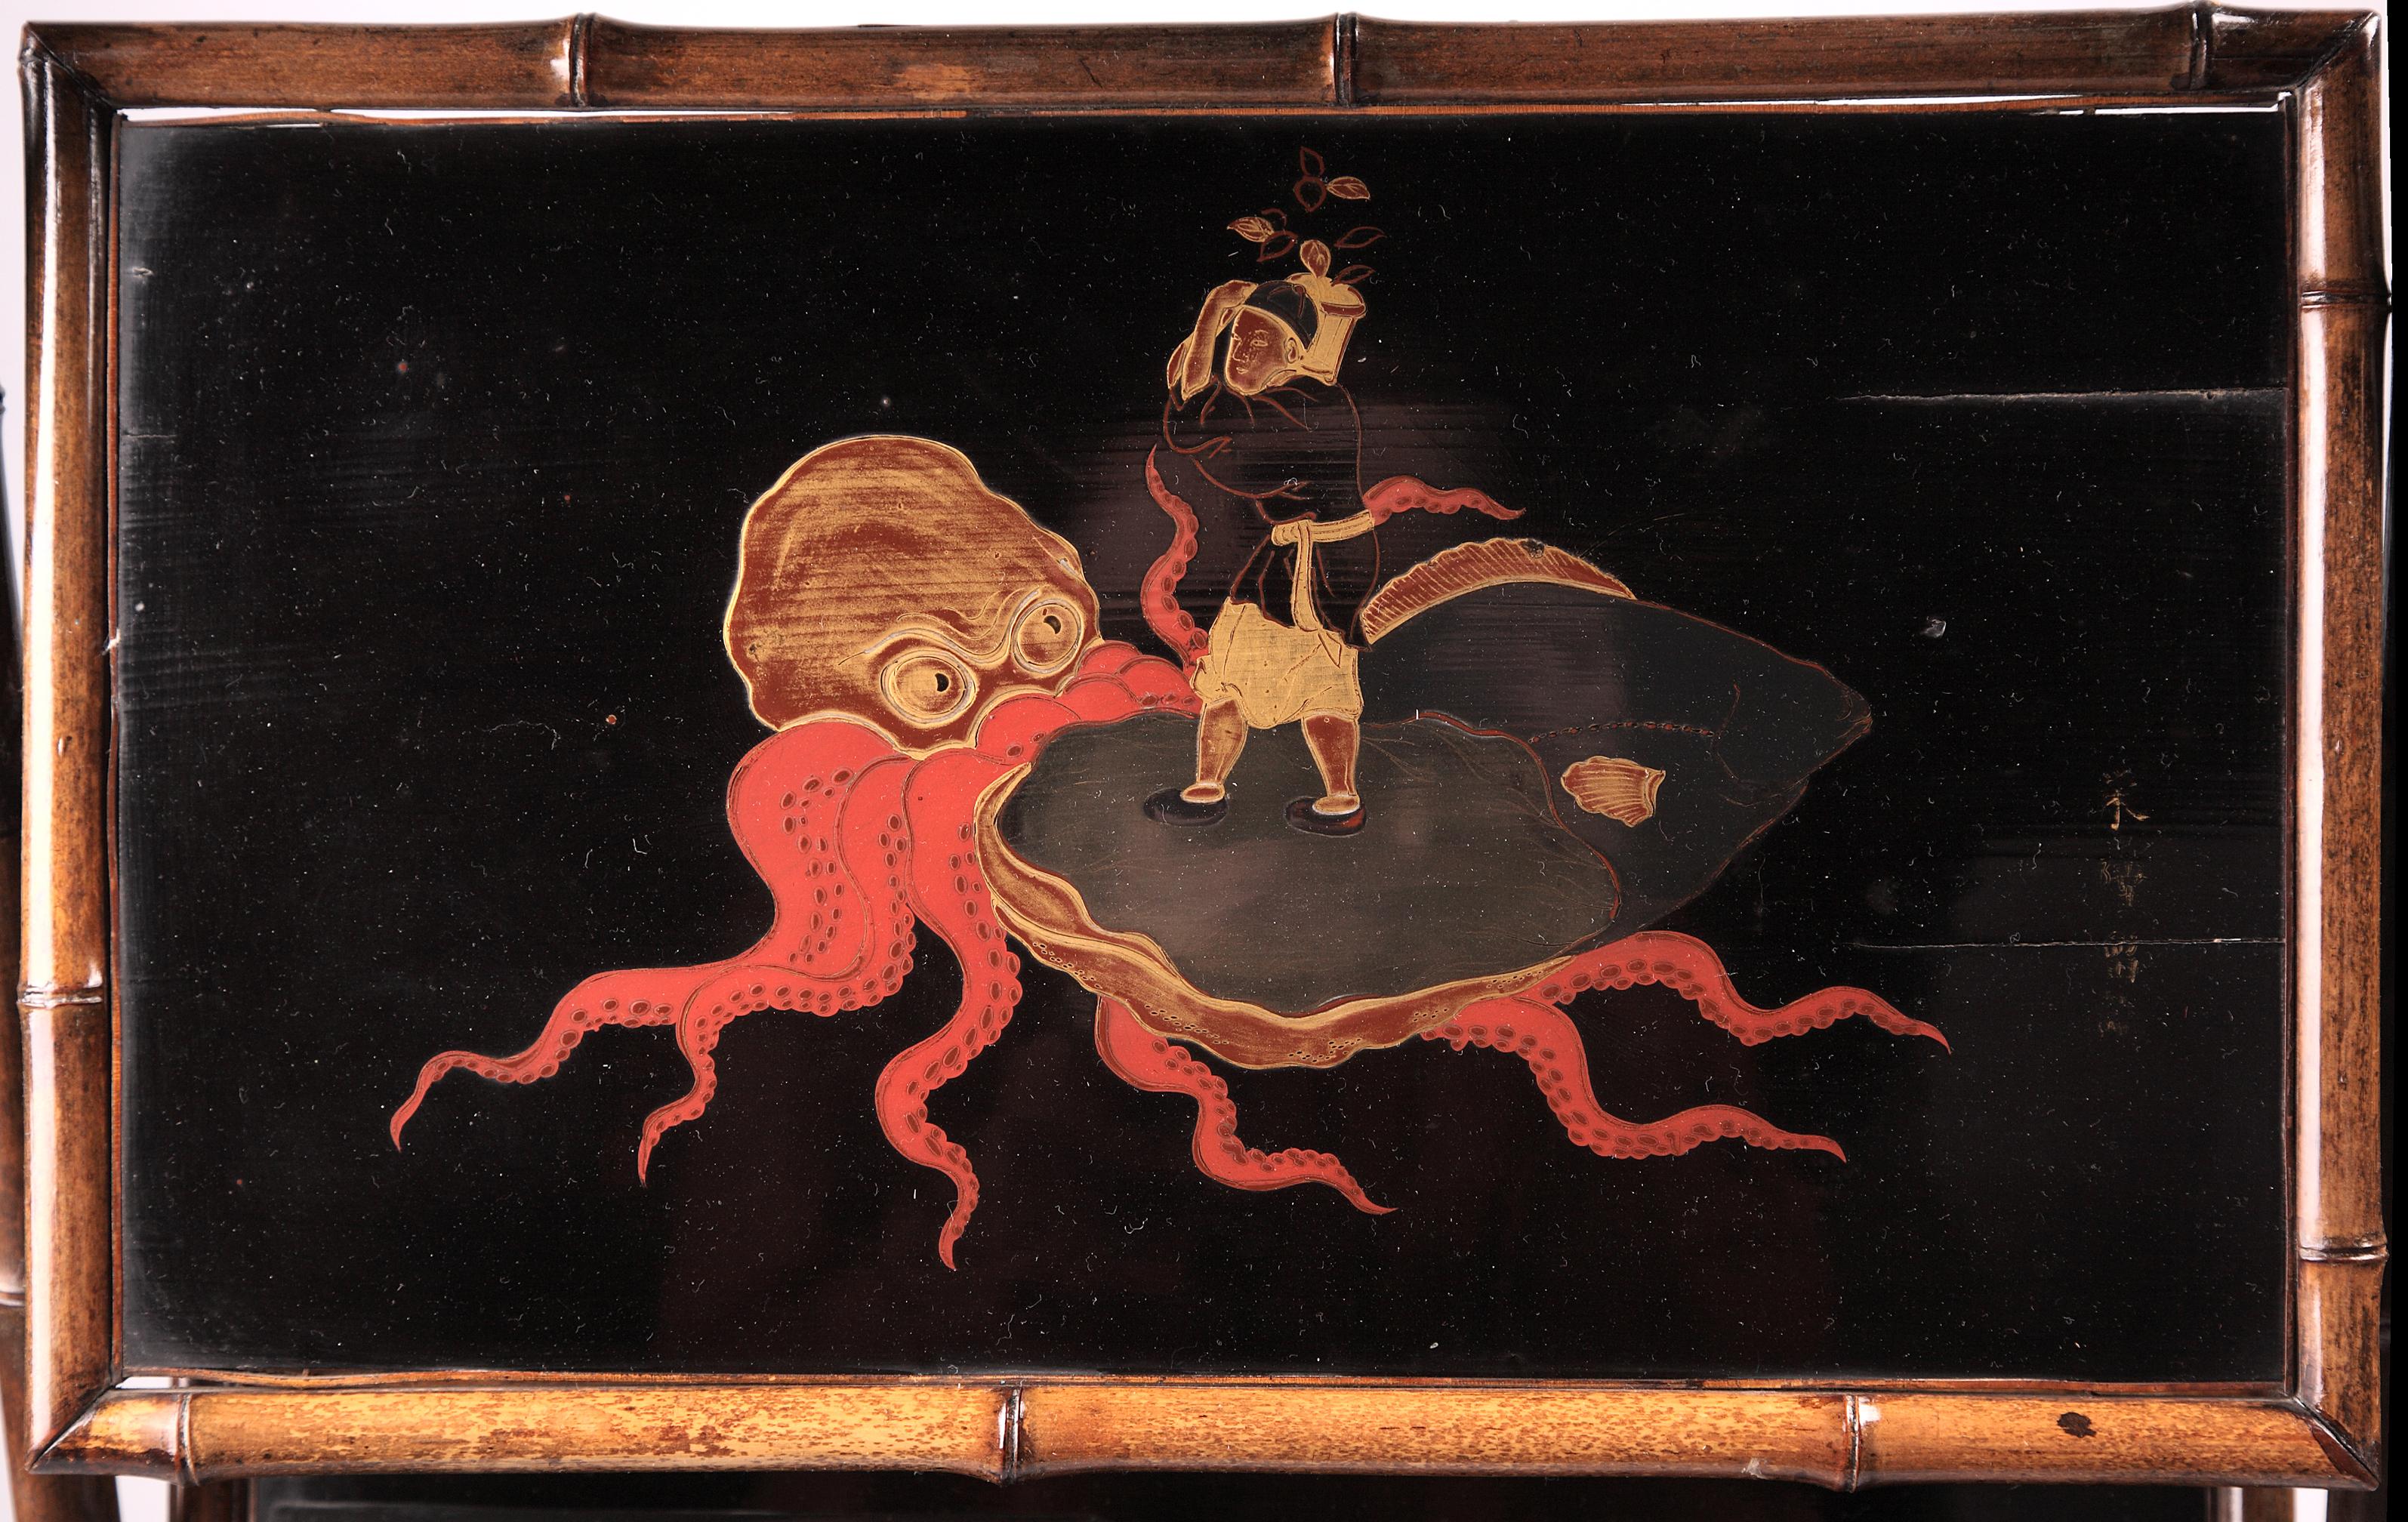 Japonisme Japan Lacquer Servant Table Attributed to A. Perret & E. Vibert, France, c. 1880